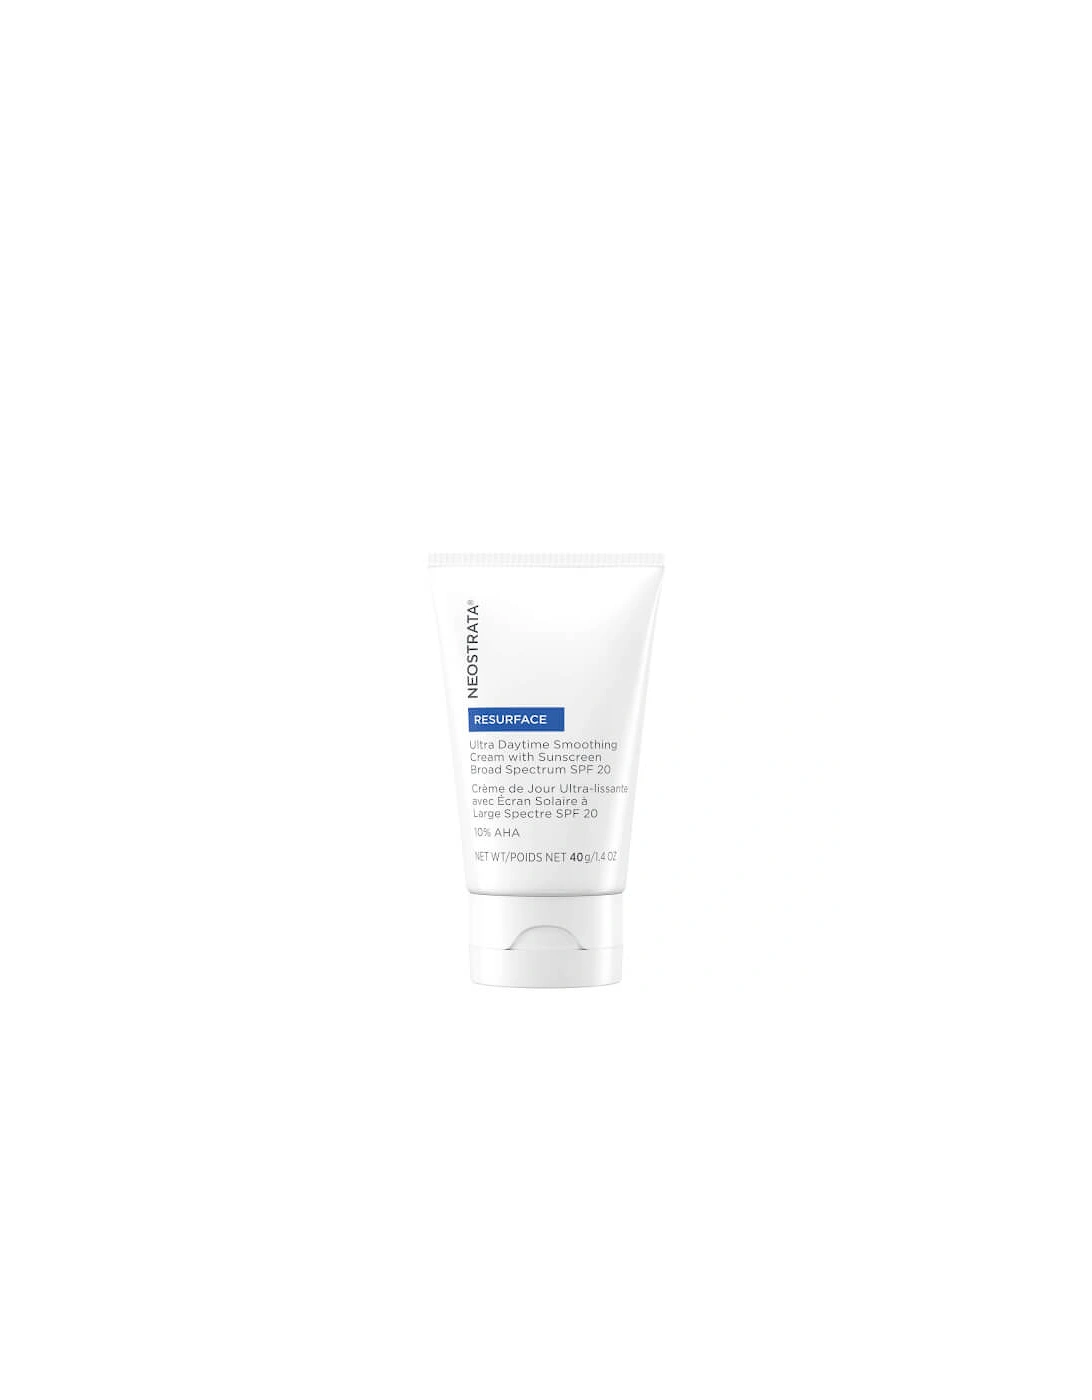 Resurface Ultra Daytime Smoothing Cream for Face with SPF 20 40g - Neostrata, 2 of 1